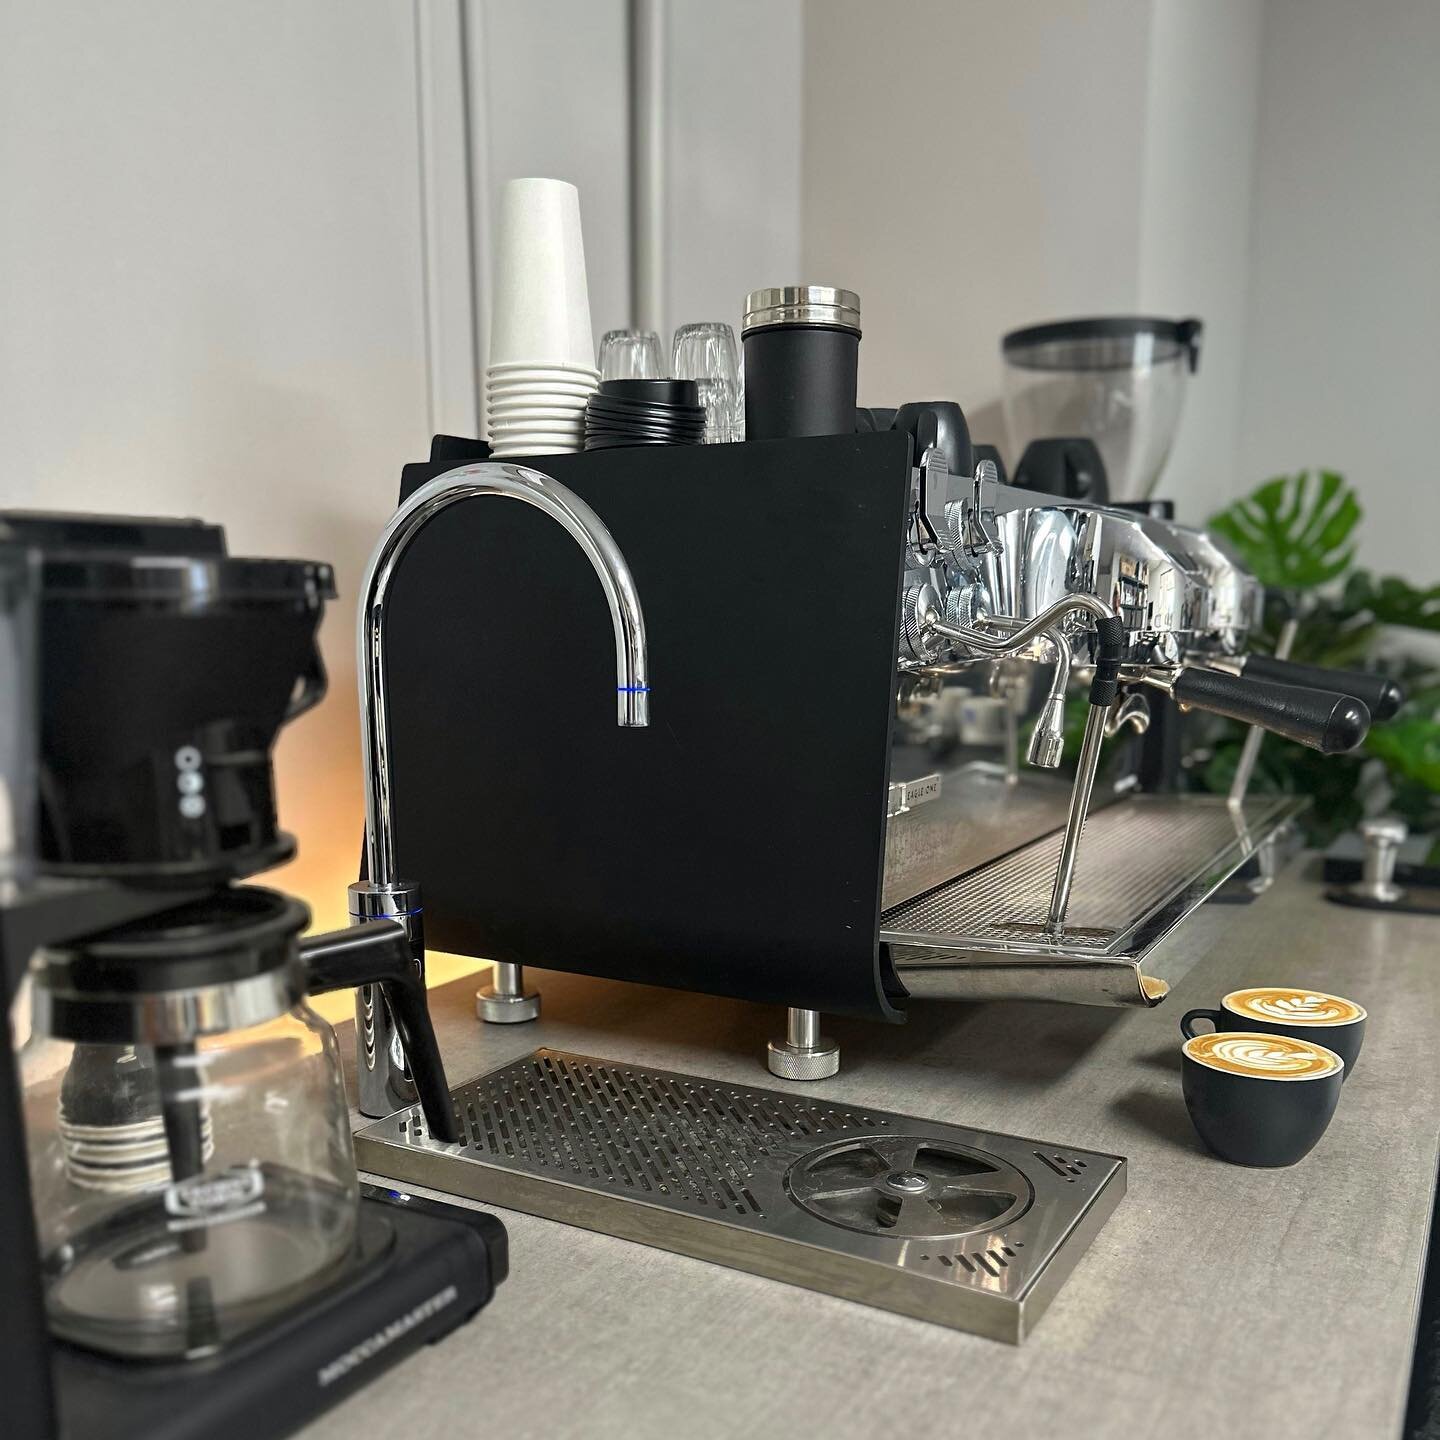 Visit us at our new location 5/43 Township Drive, Burleigh Heads. 

We have coffee flowing, music playing &amp; equipment on display in our showroom if you are looking for an upgrade, or in need of a pre loved grinder as a back up for your cafe ☕️ 
&